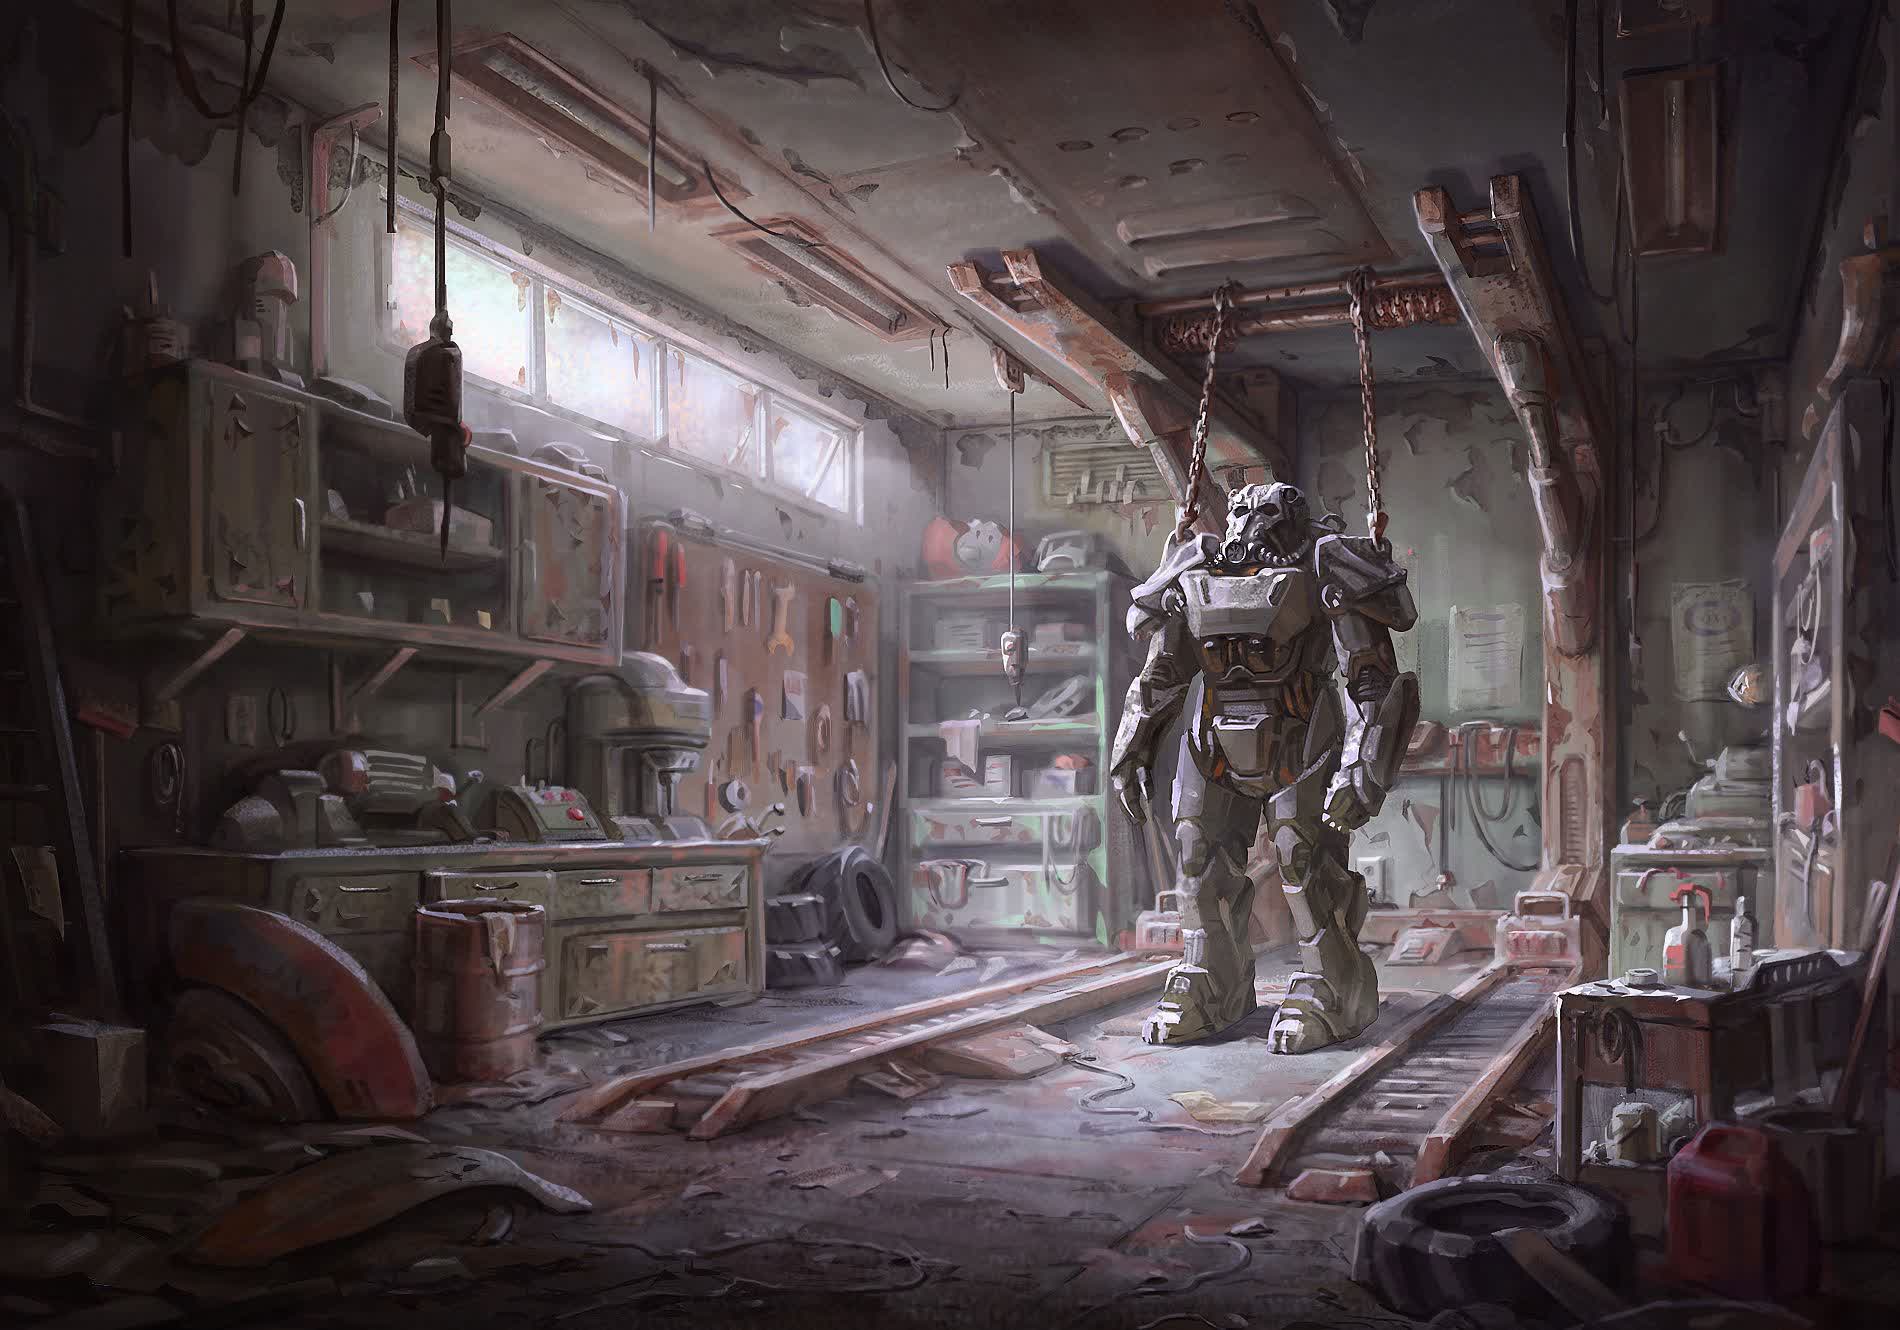 Amazon reveals first official look at the Fallout TV show